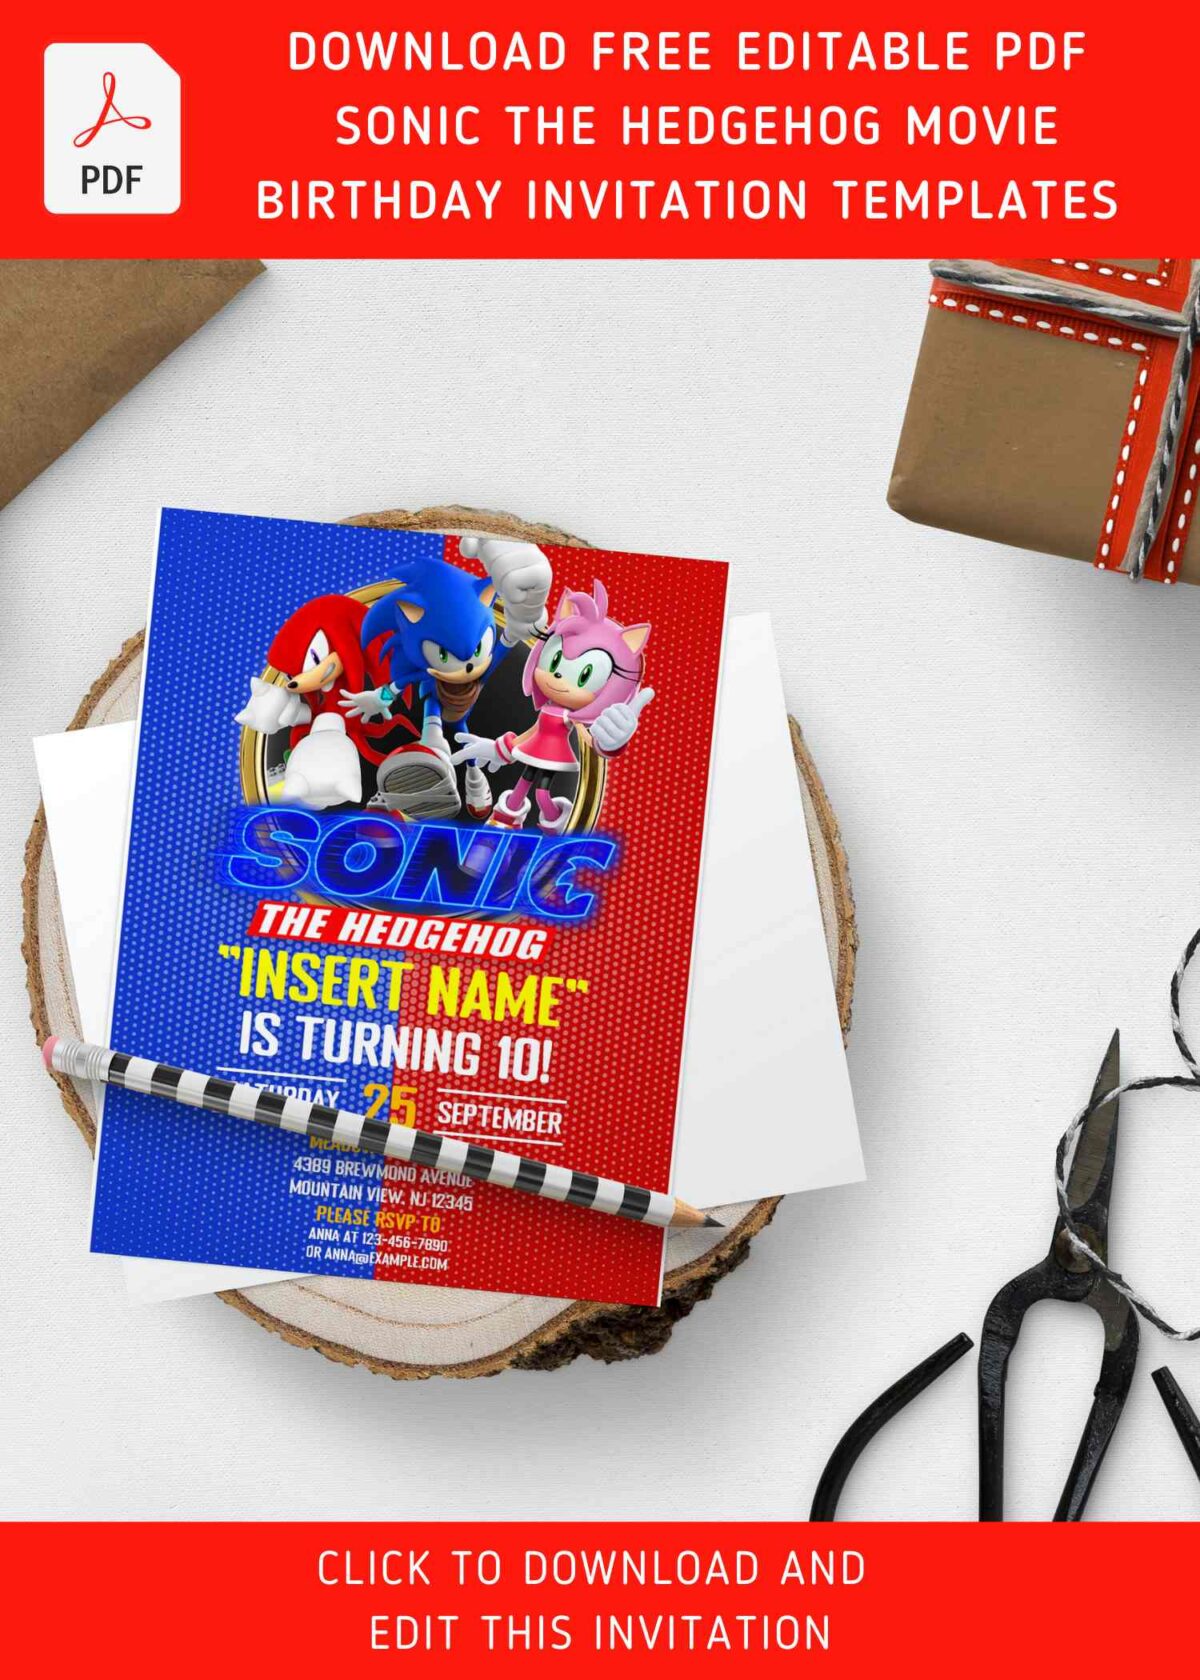 (Free Editable PDF) Sonic The Hedgehog Movie Themed Birthday Invitation Templates with Rouge the Bat